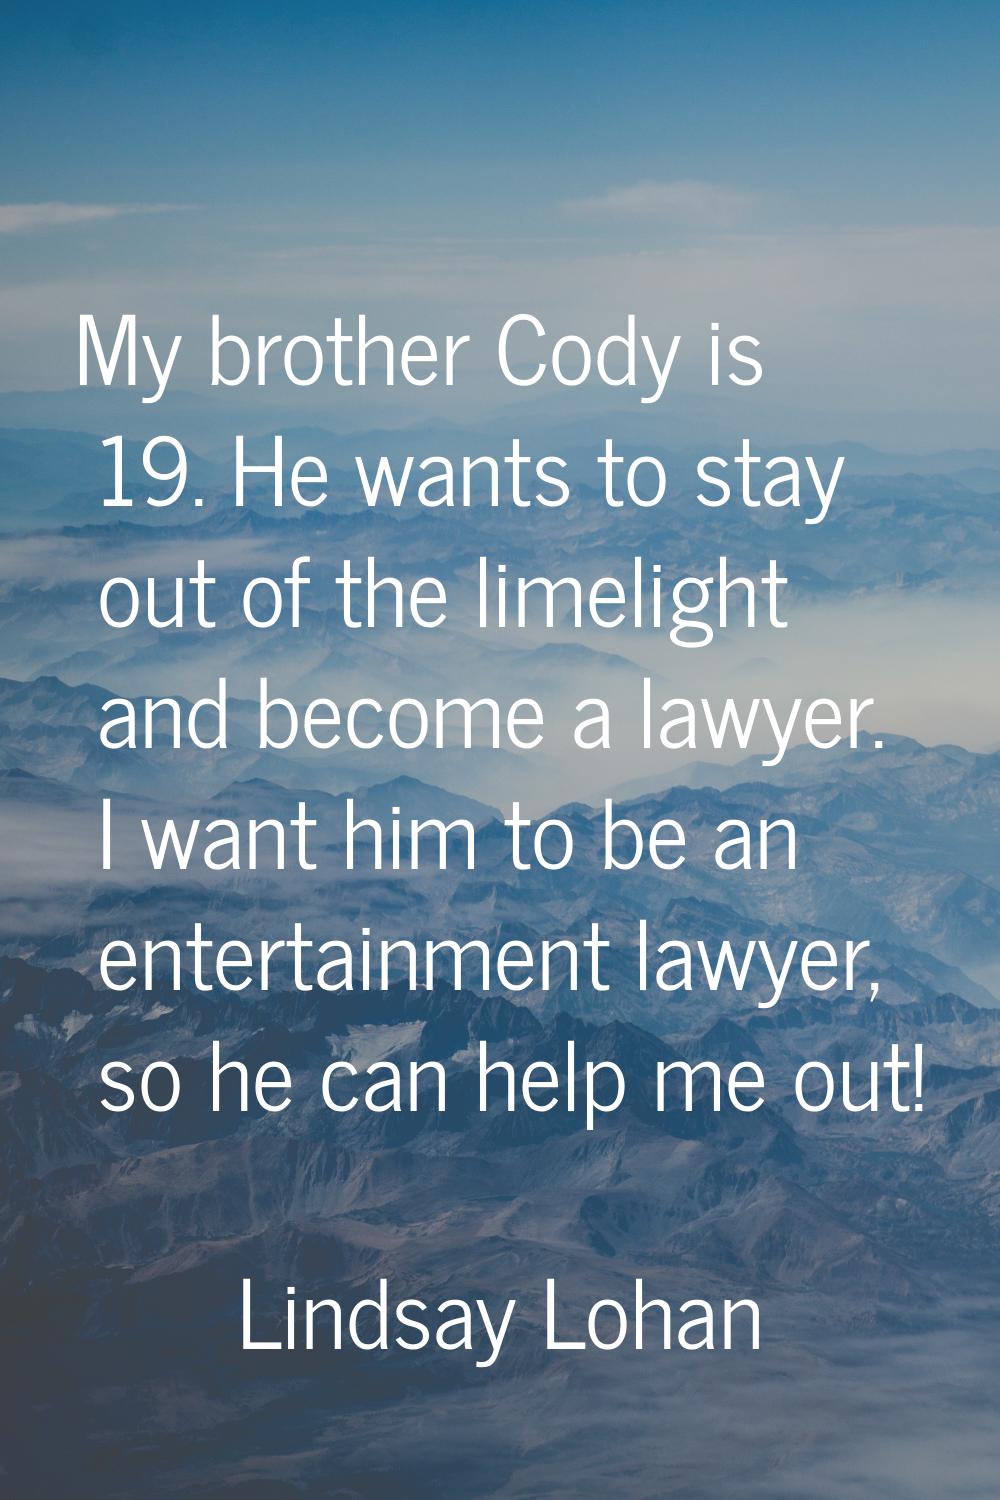 My brother Cody is 19. He wants to stay out of the limelight and become a lawyer. I want him to be 